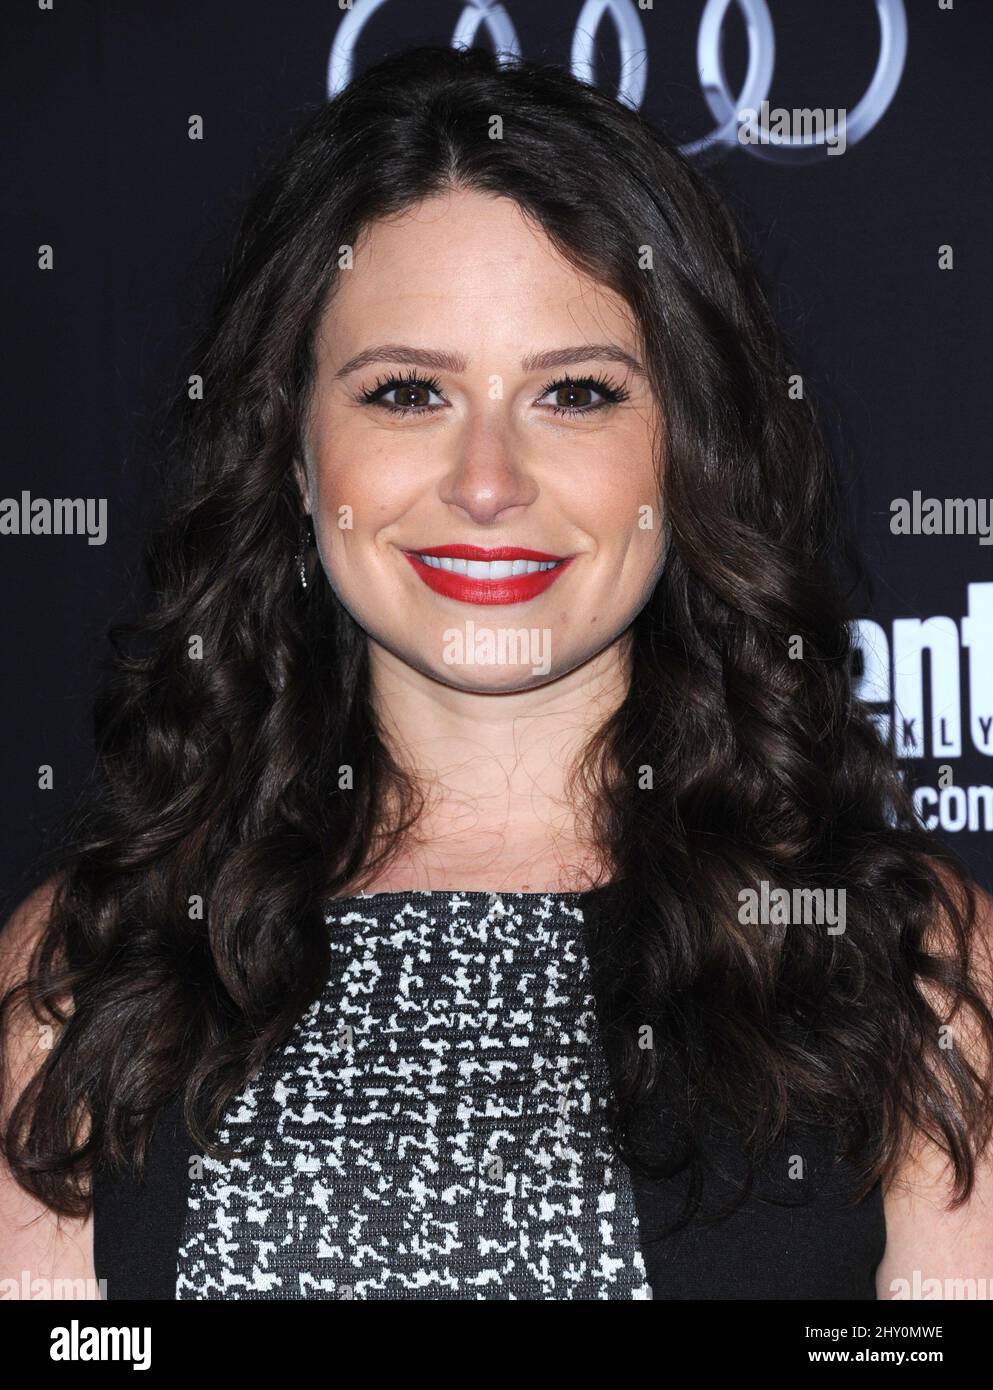 Katie Lowes Attending The Entertainment Weekly Pre SAG Party Hosted By